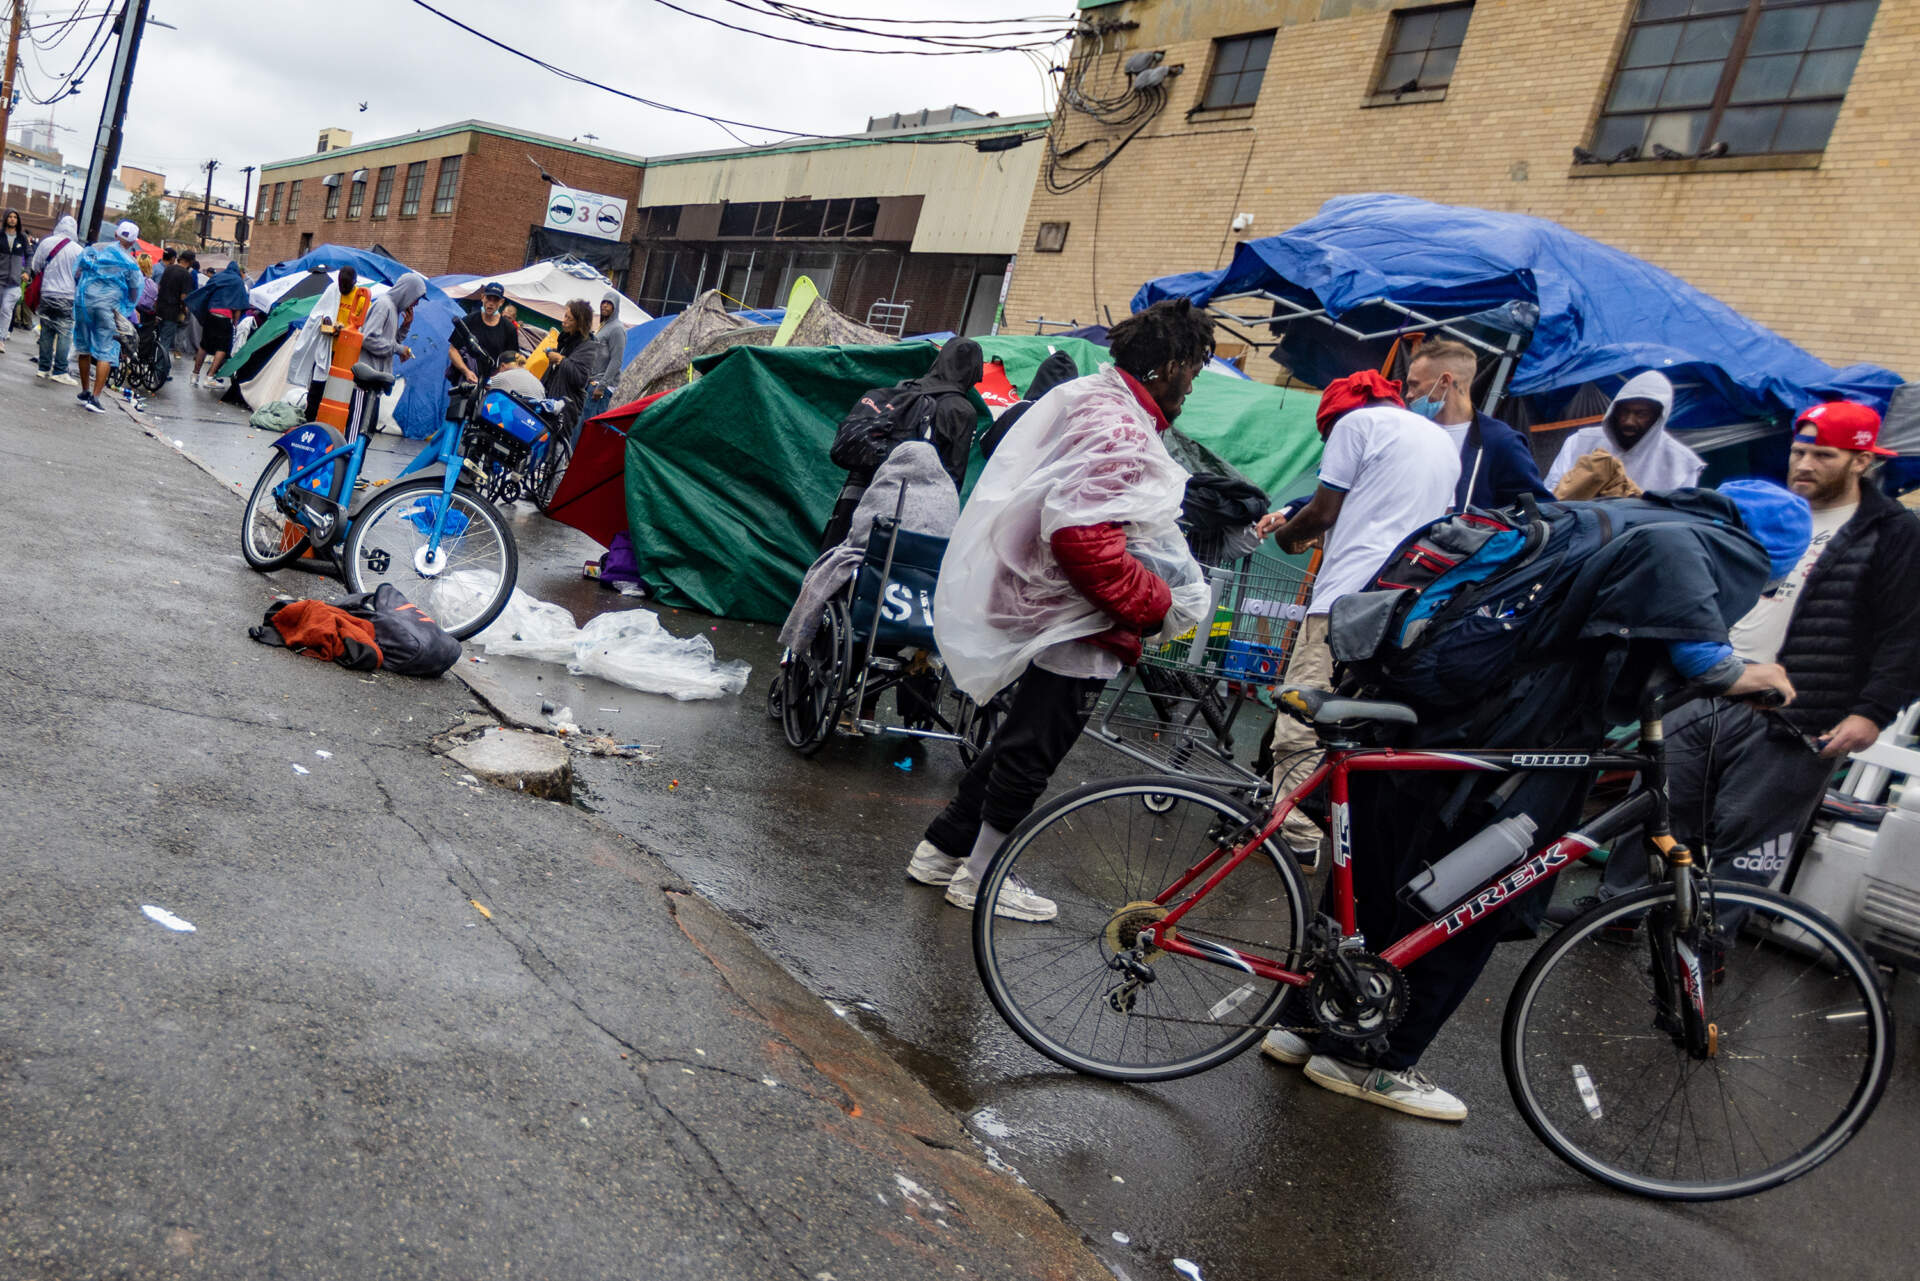 People congregate around the tents on Atkinson Street in the area known as "Mass. and Cass," Aug. 25, 2023. (Jesse Costa/WBUR)